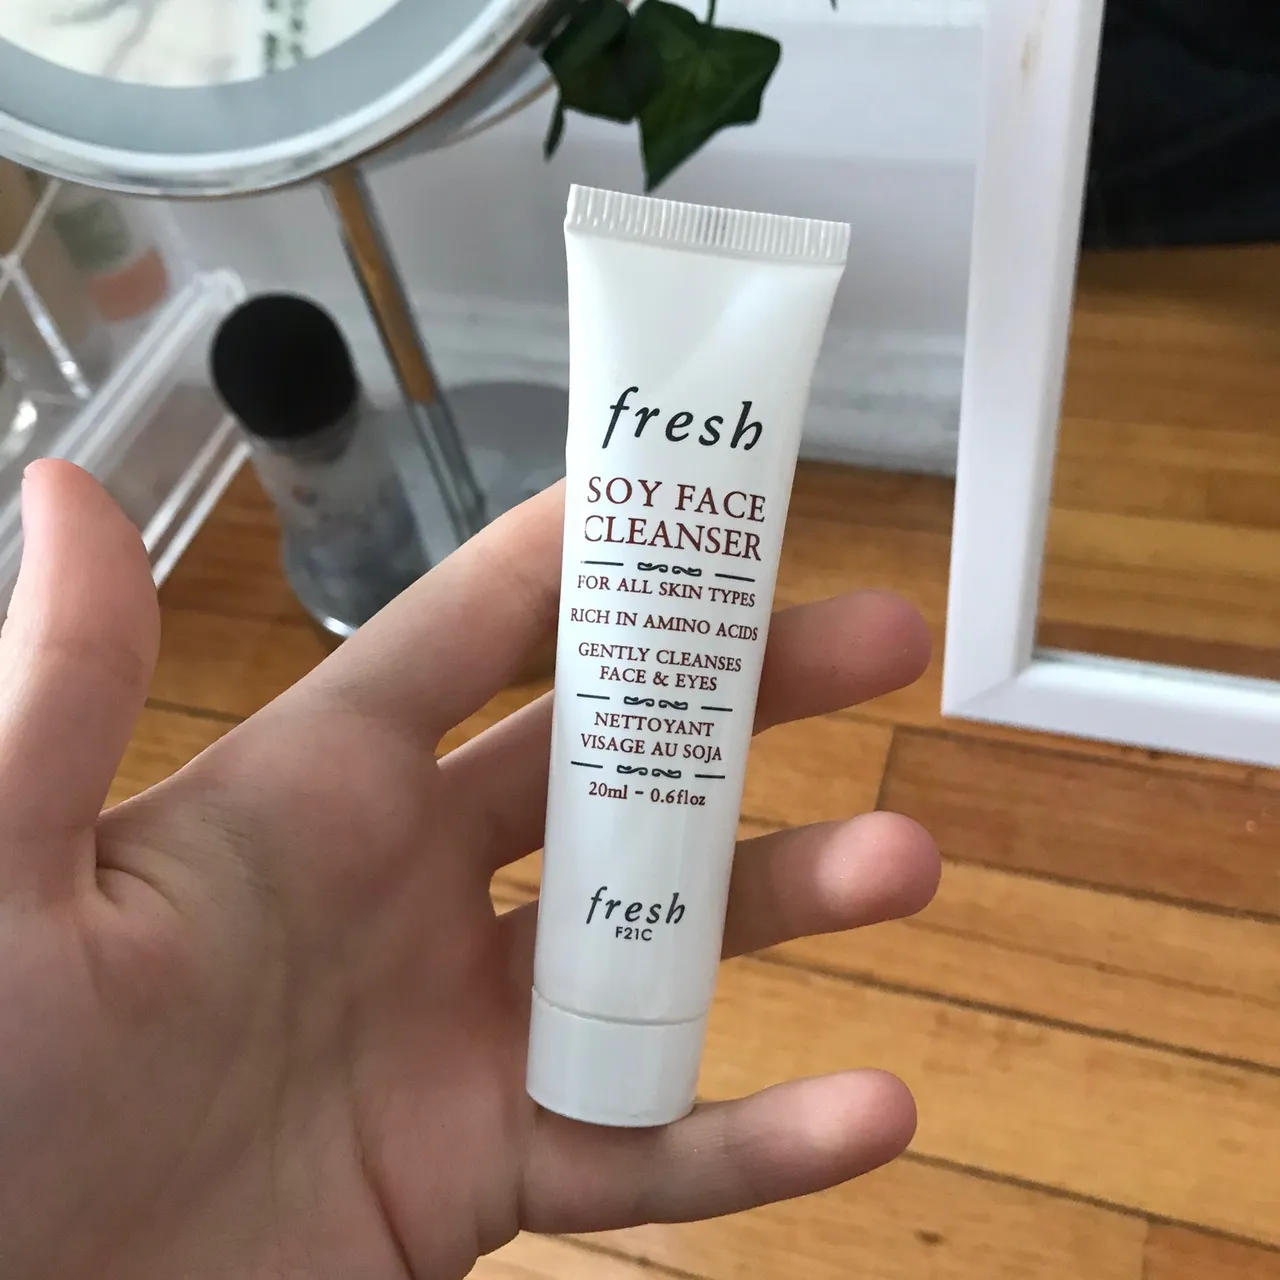 fresh soy face cleanser photo 1